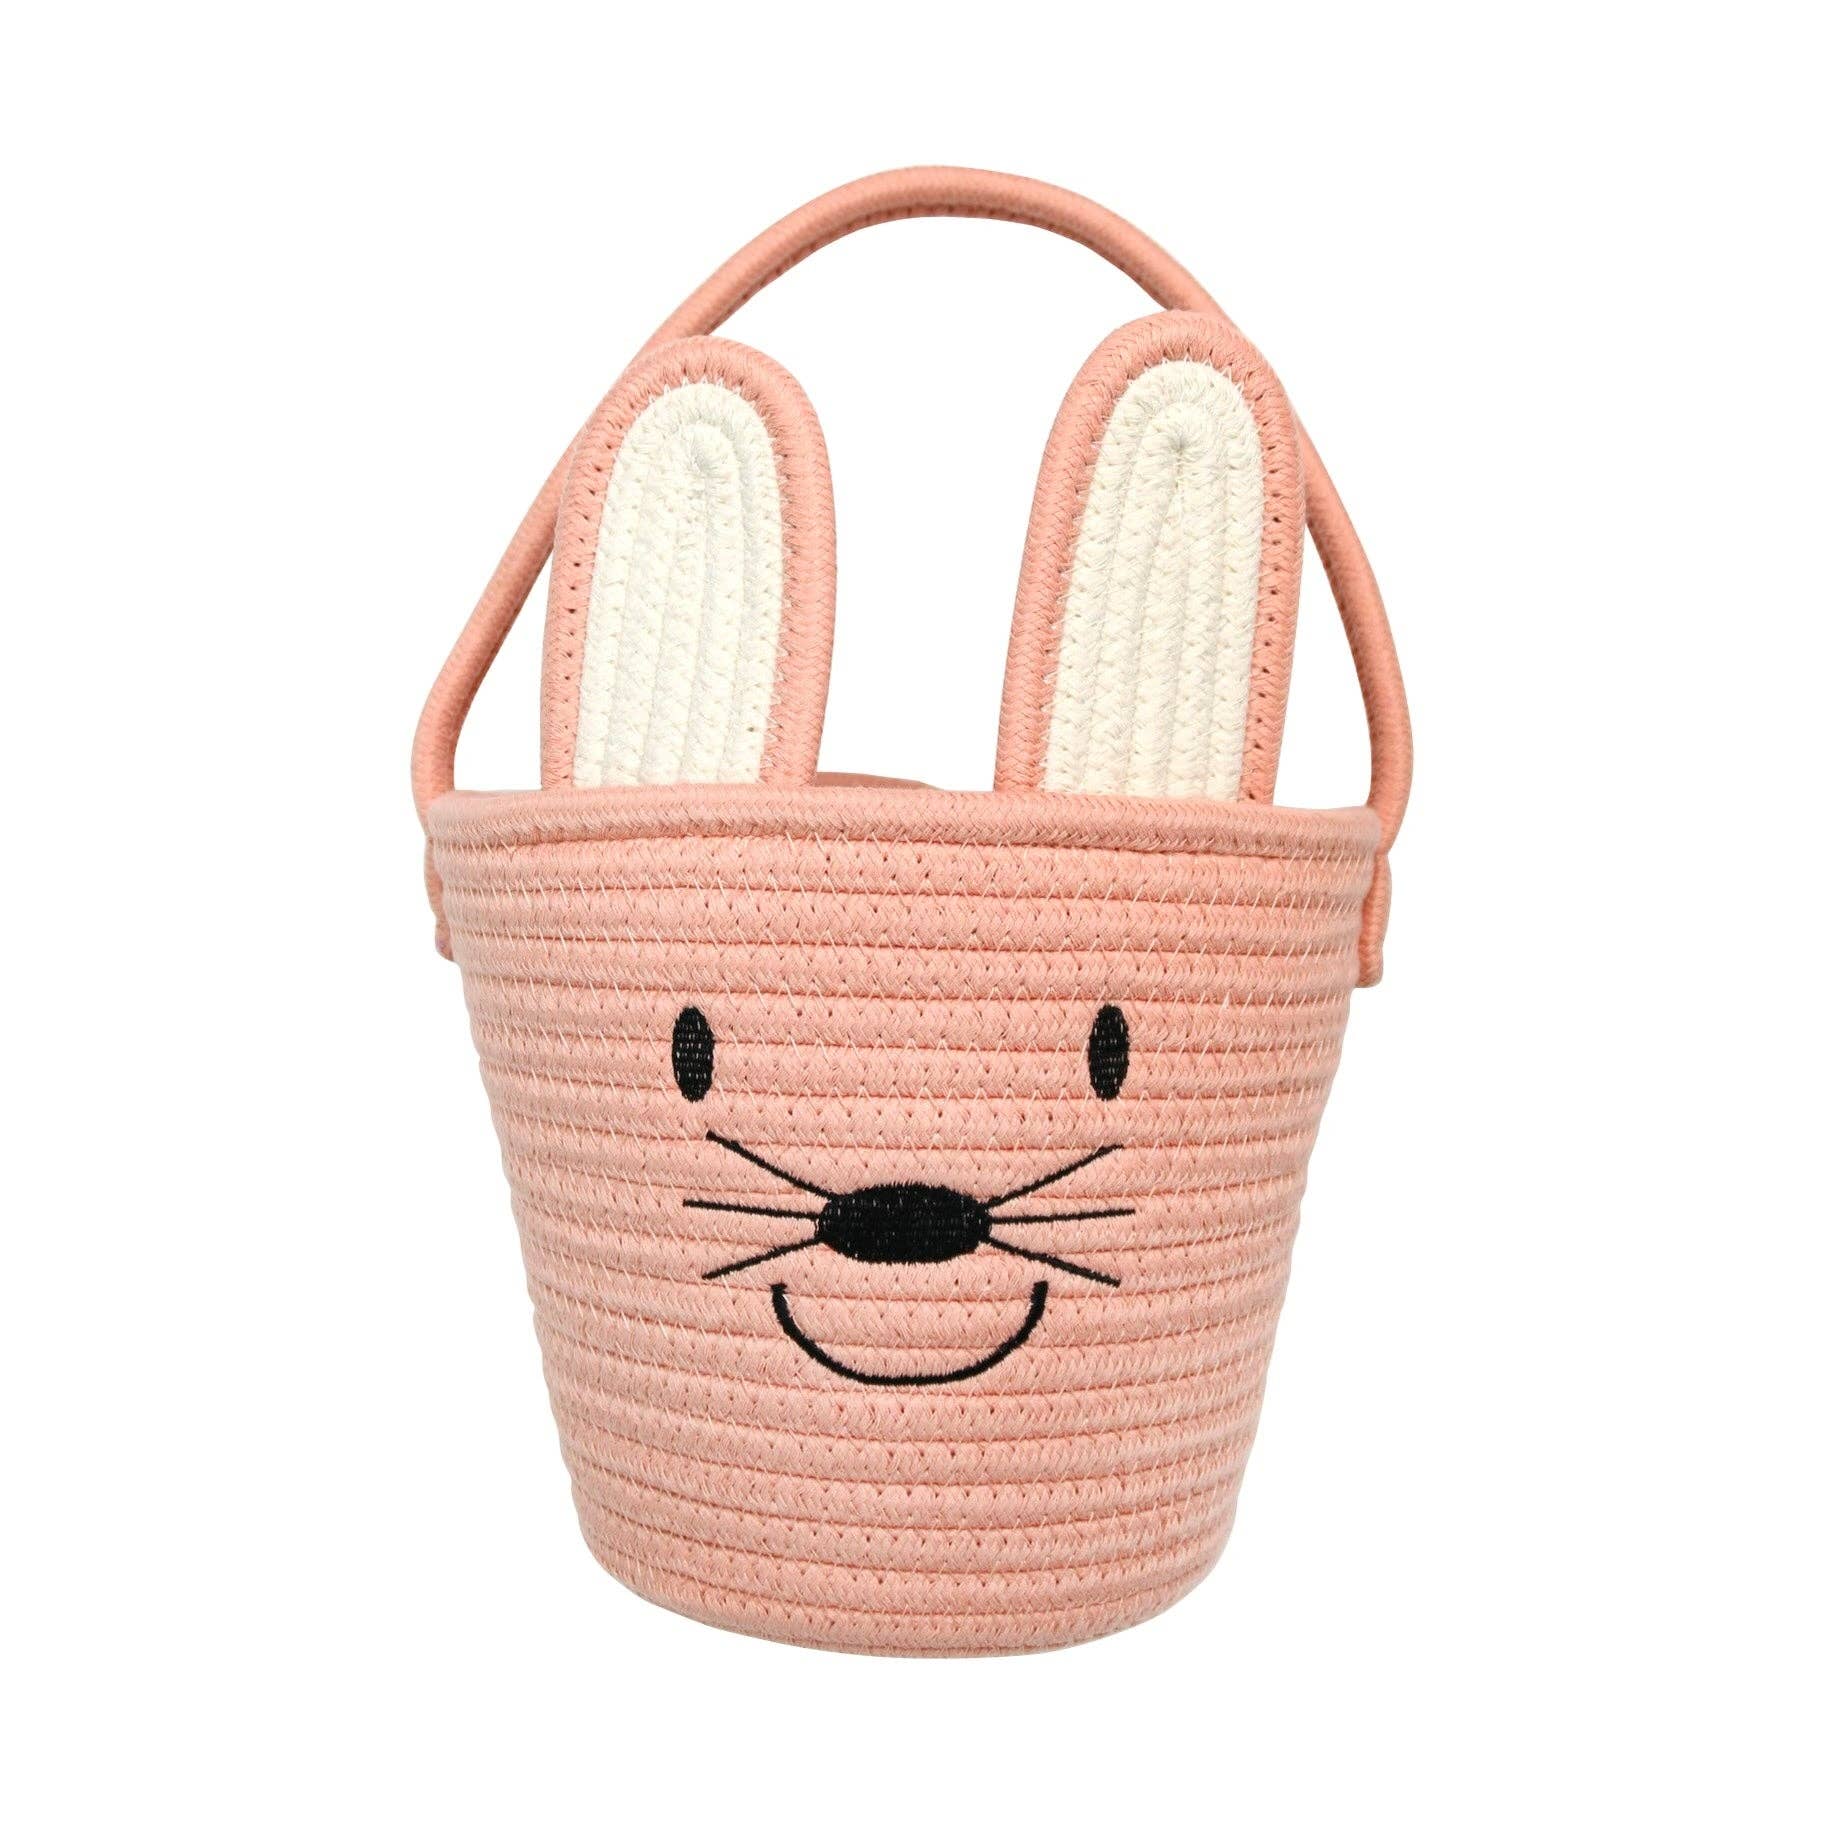 Emerson and Friends - Rope Easter Basket - Pink Bunny, Lucy's Room